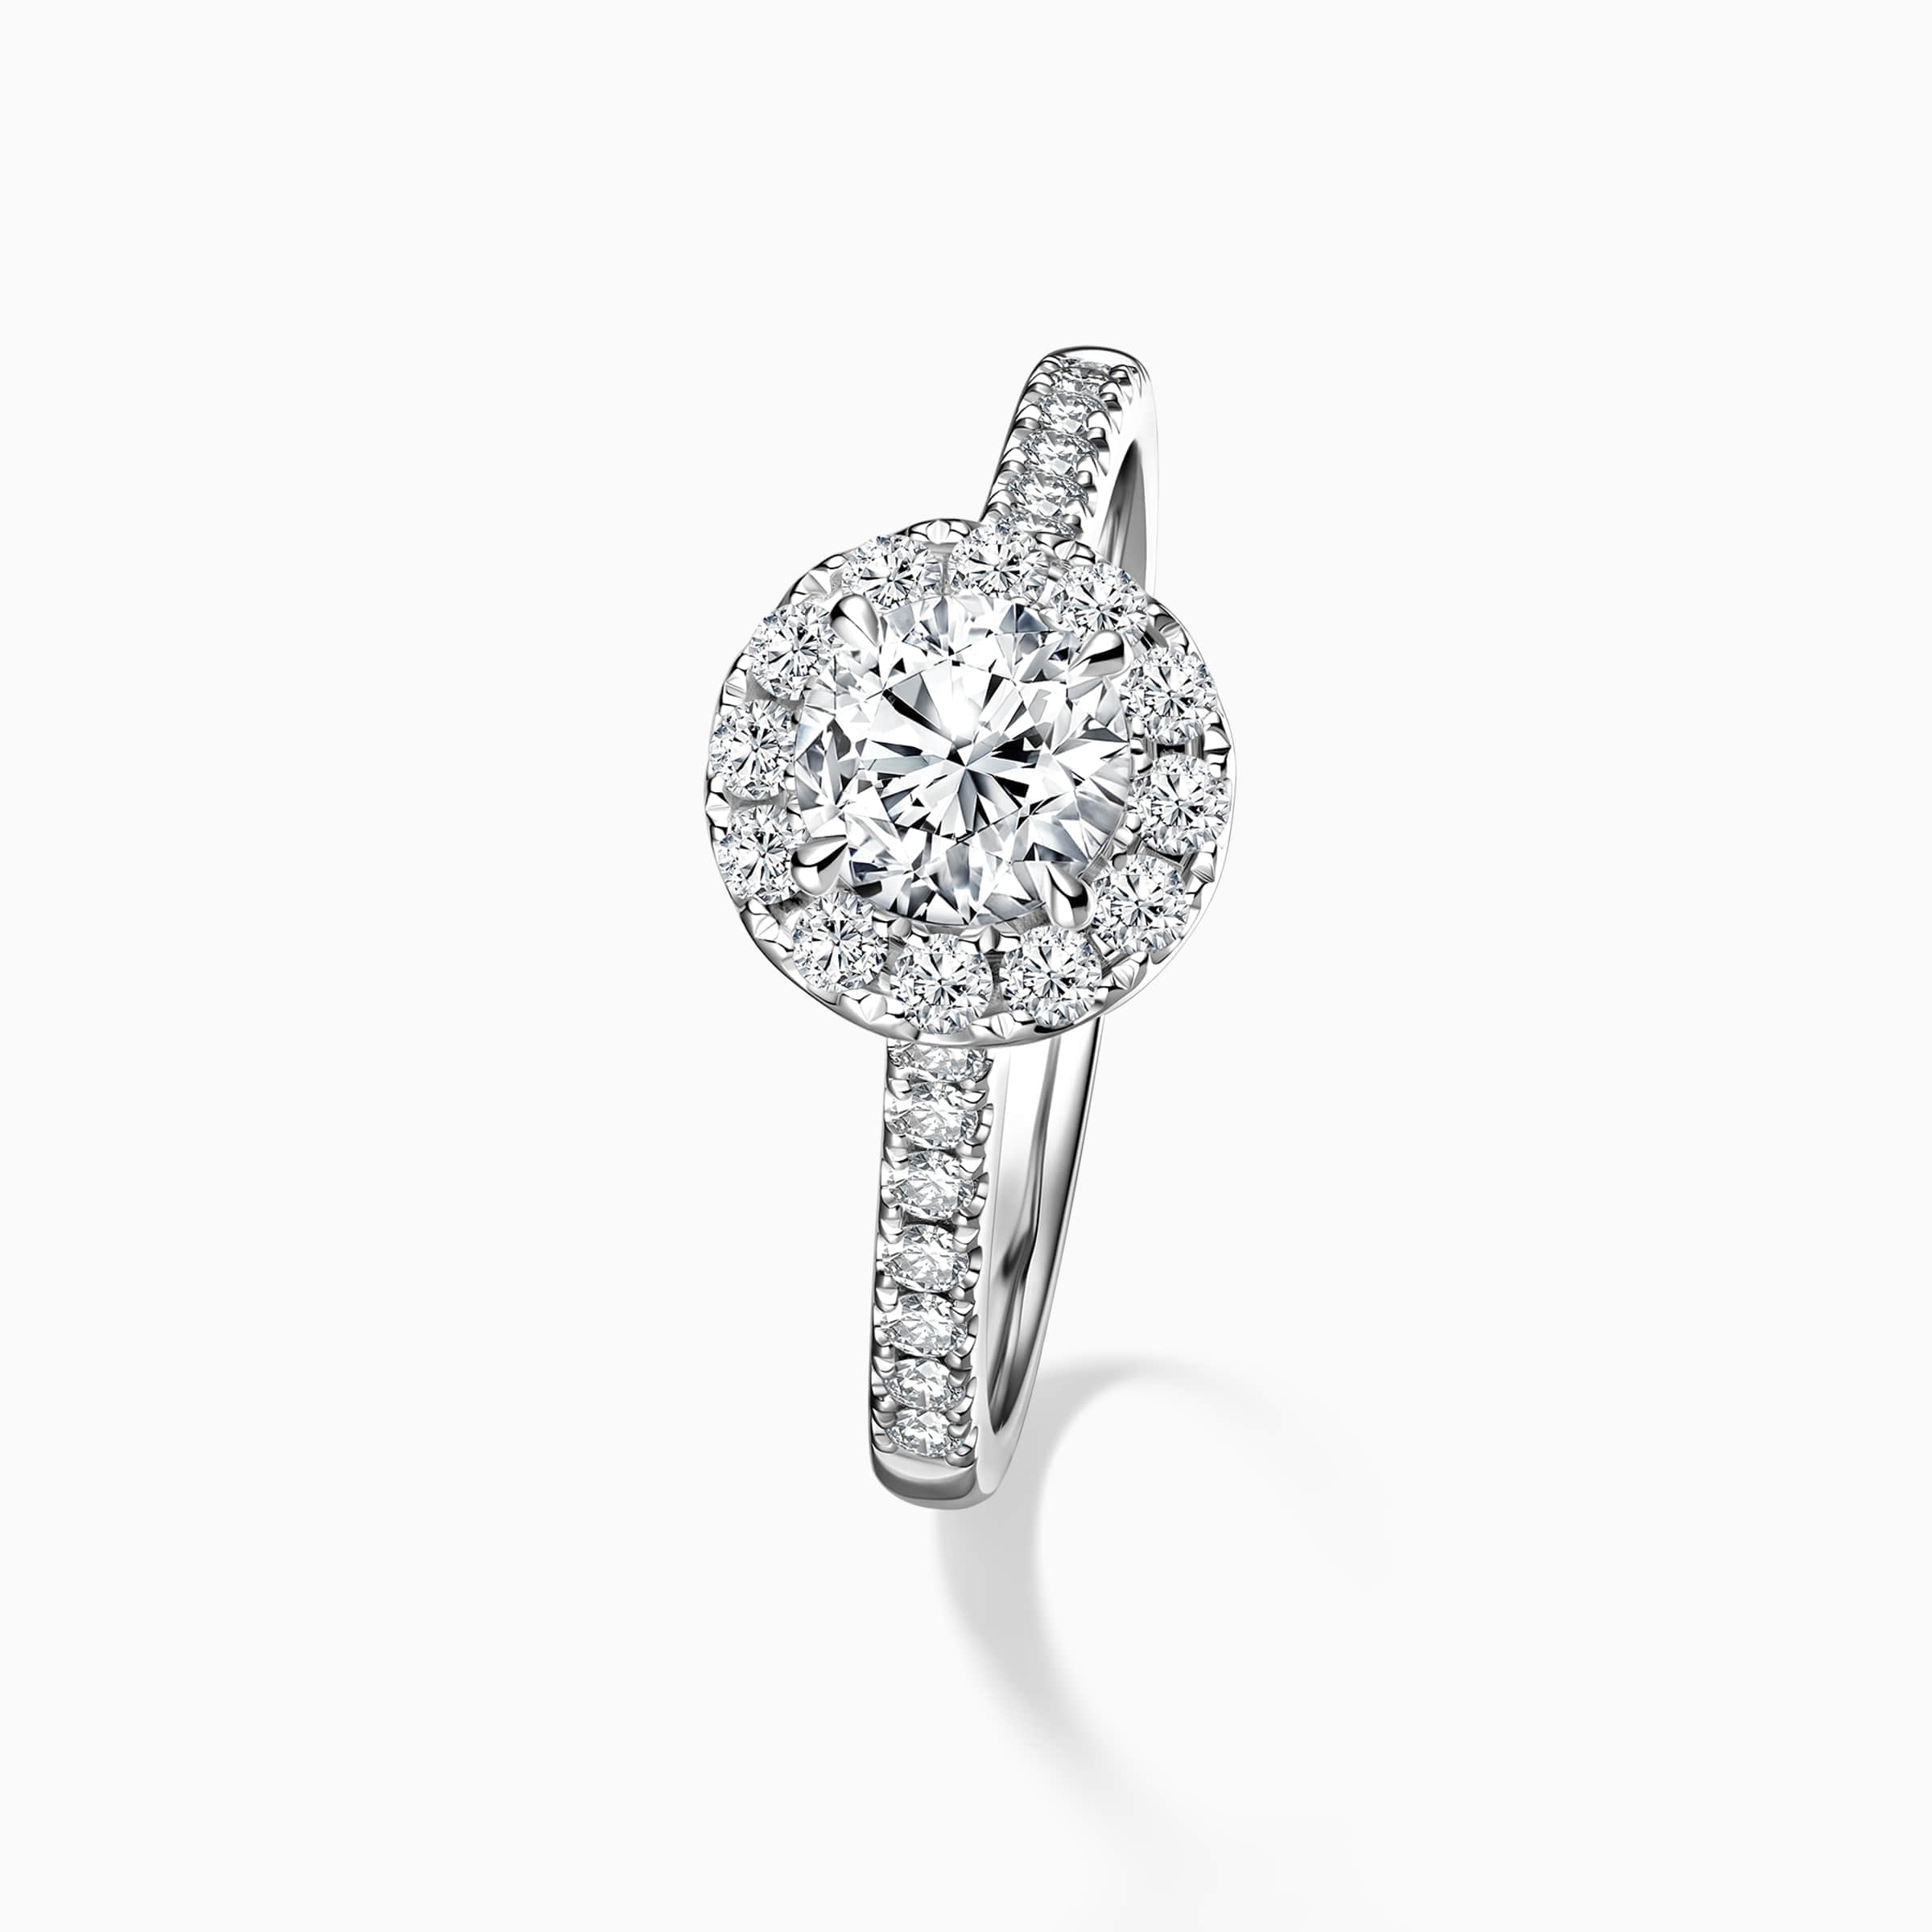 Darry Ring round halo engagement ring top view